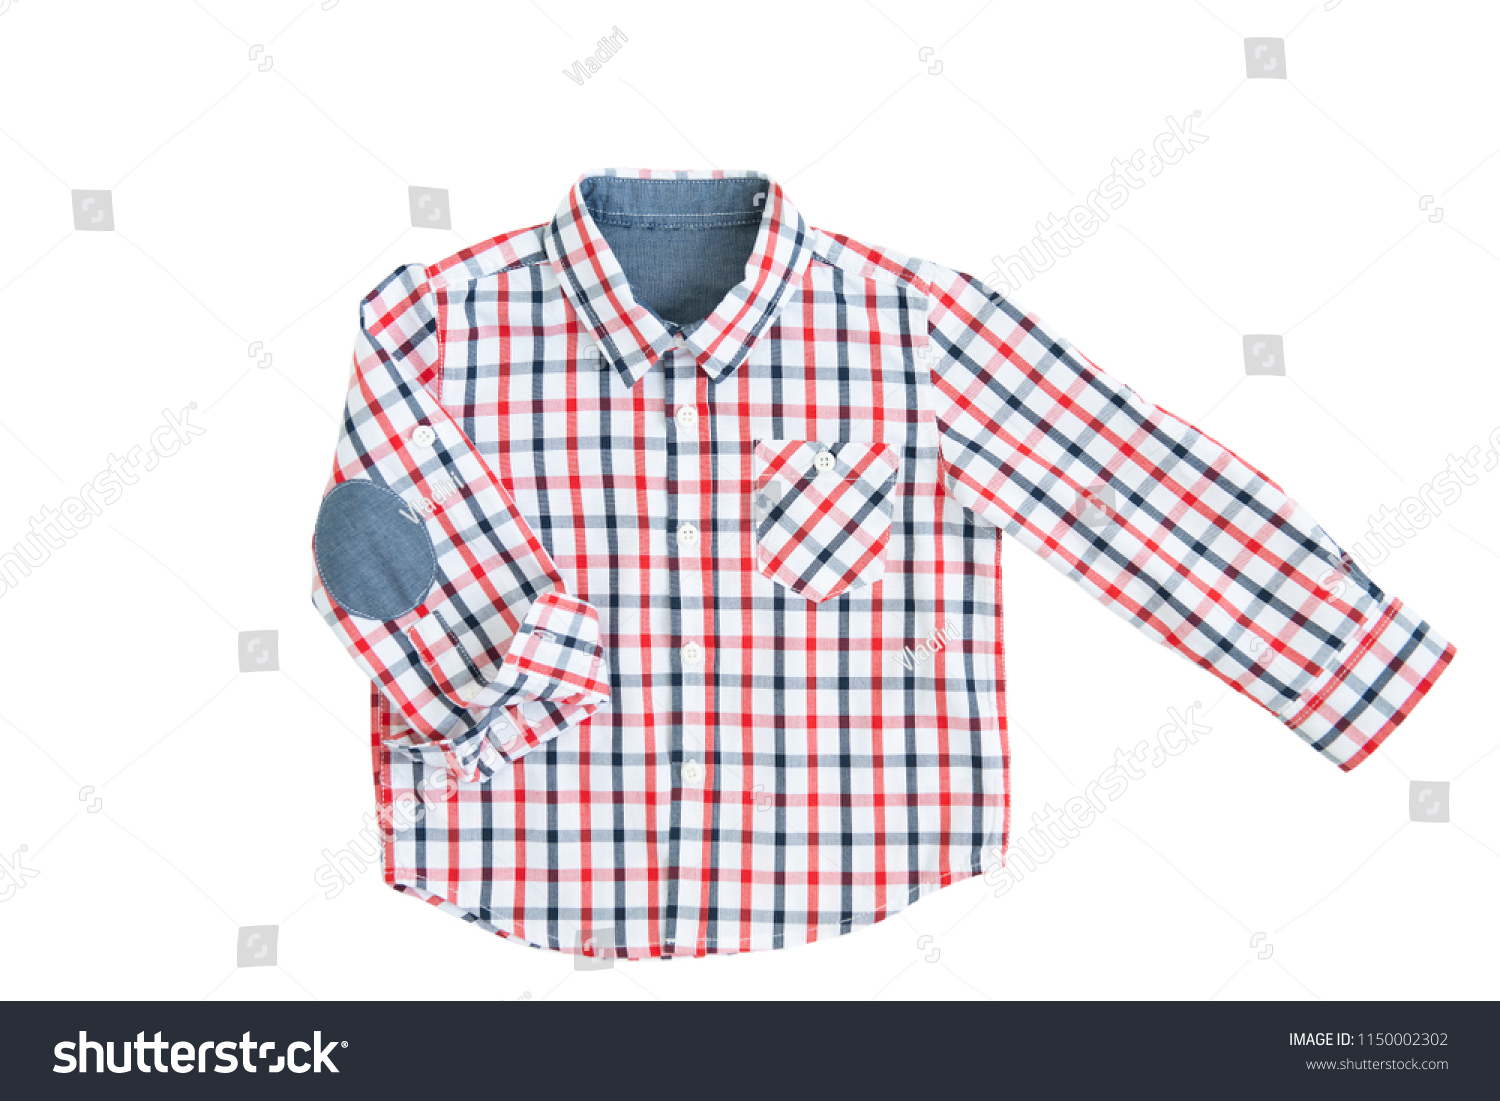 Fashionable blue-red caged shirt for a boy isolated on a white background/ Top view/ Flat lay/ Baby clothes/ Close-up #1150002302